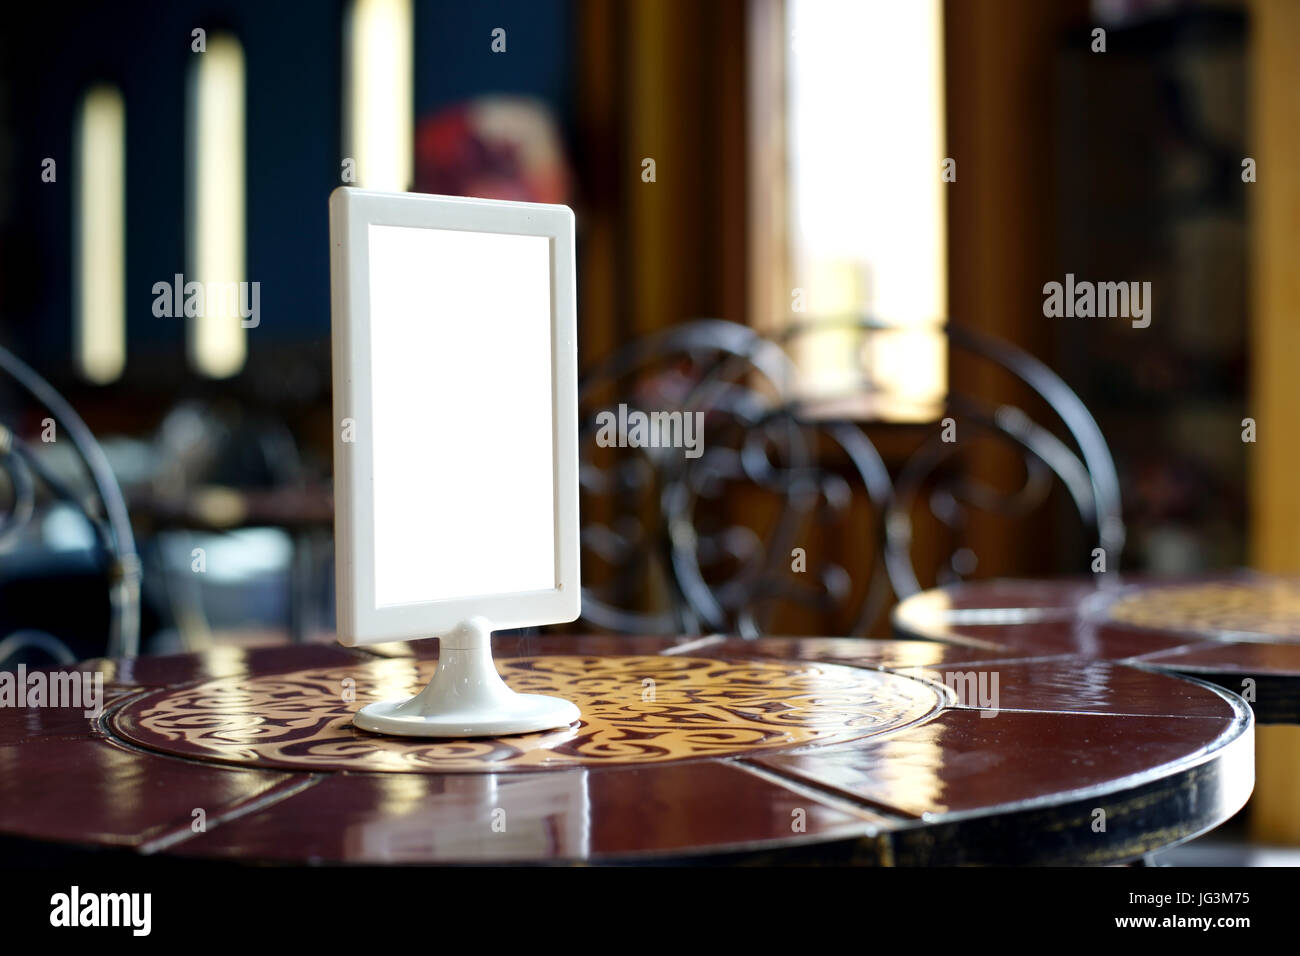 mock up menu frame stand on table in restaurant Stock Photo